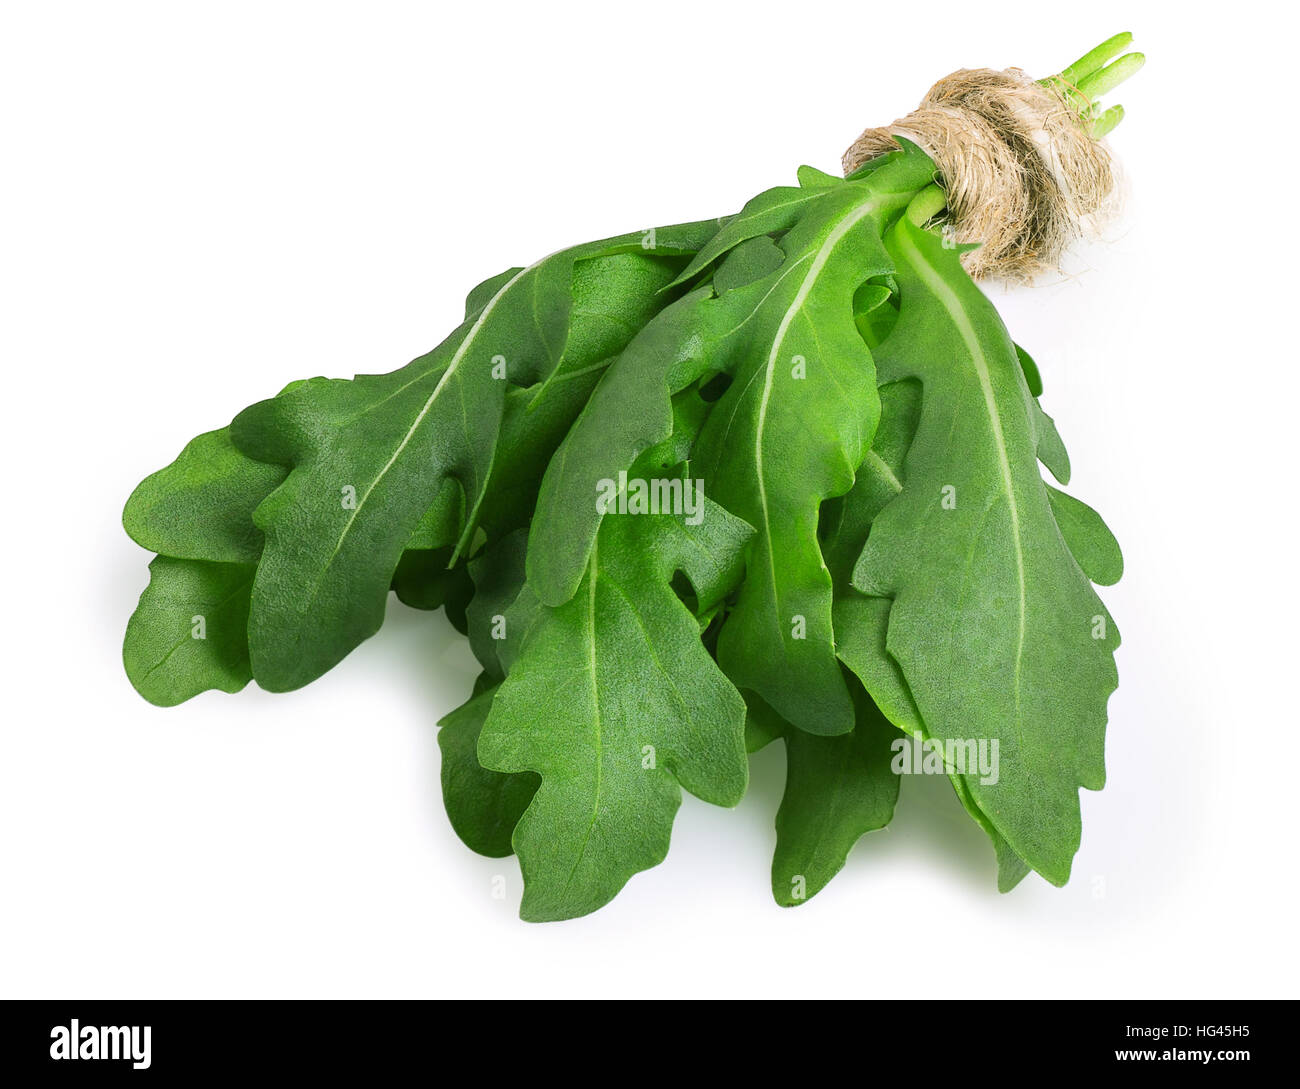 bunch of arugula or rocket leaves tied with twine isolated on white background Stock Photo